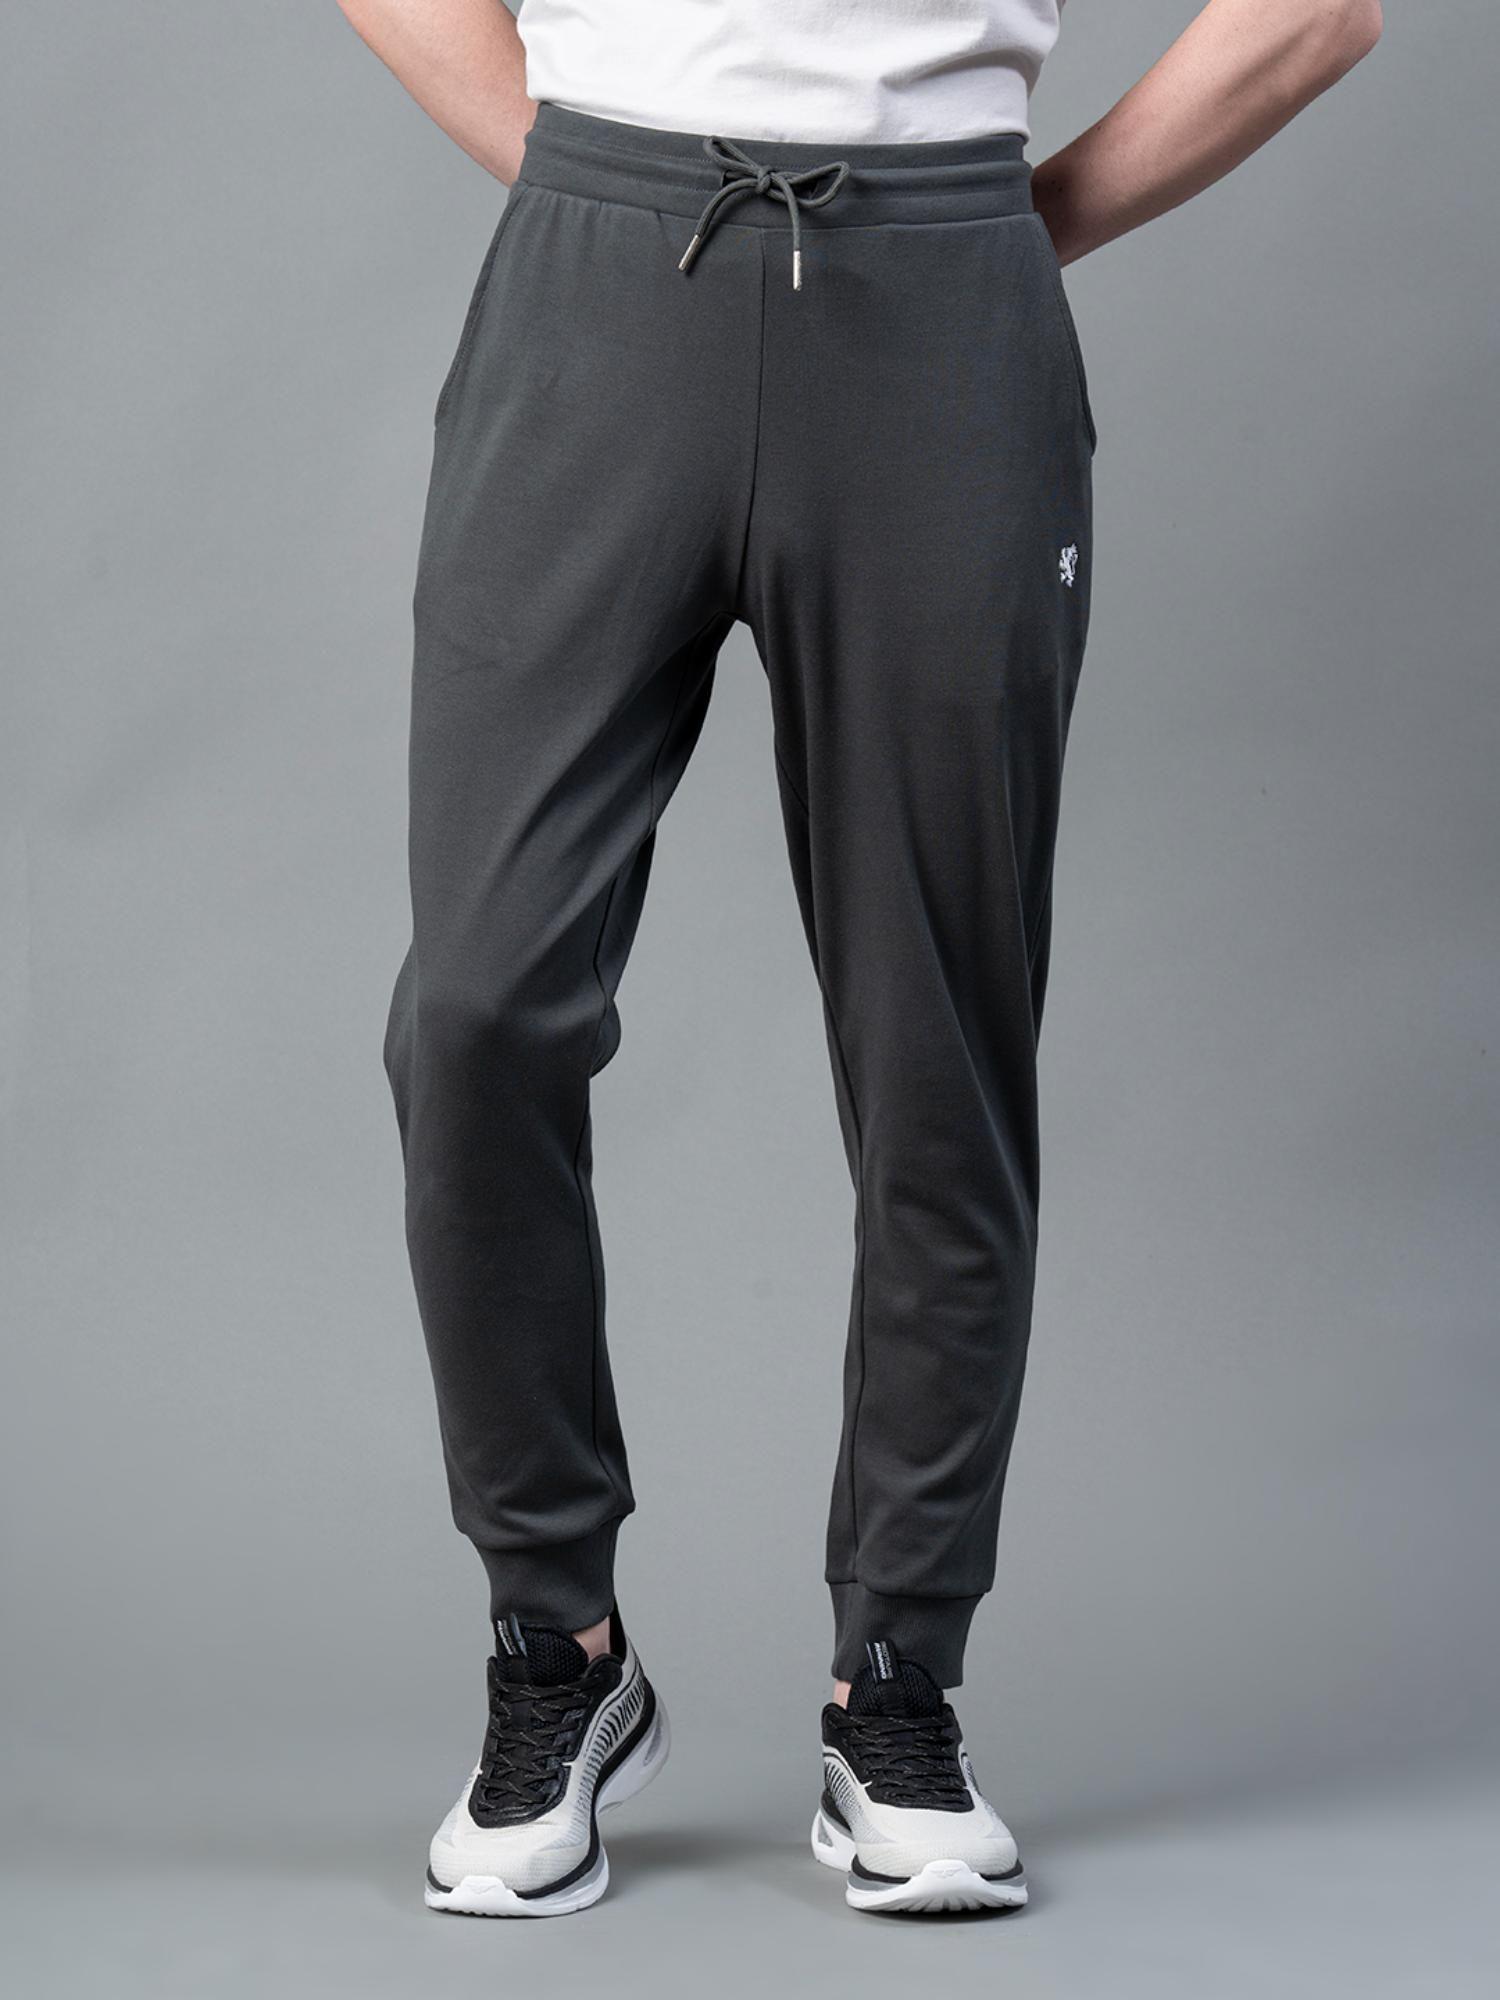 space grey solid cotton poly spandex men's joggers